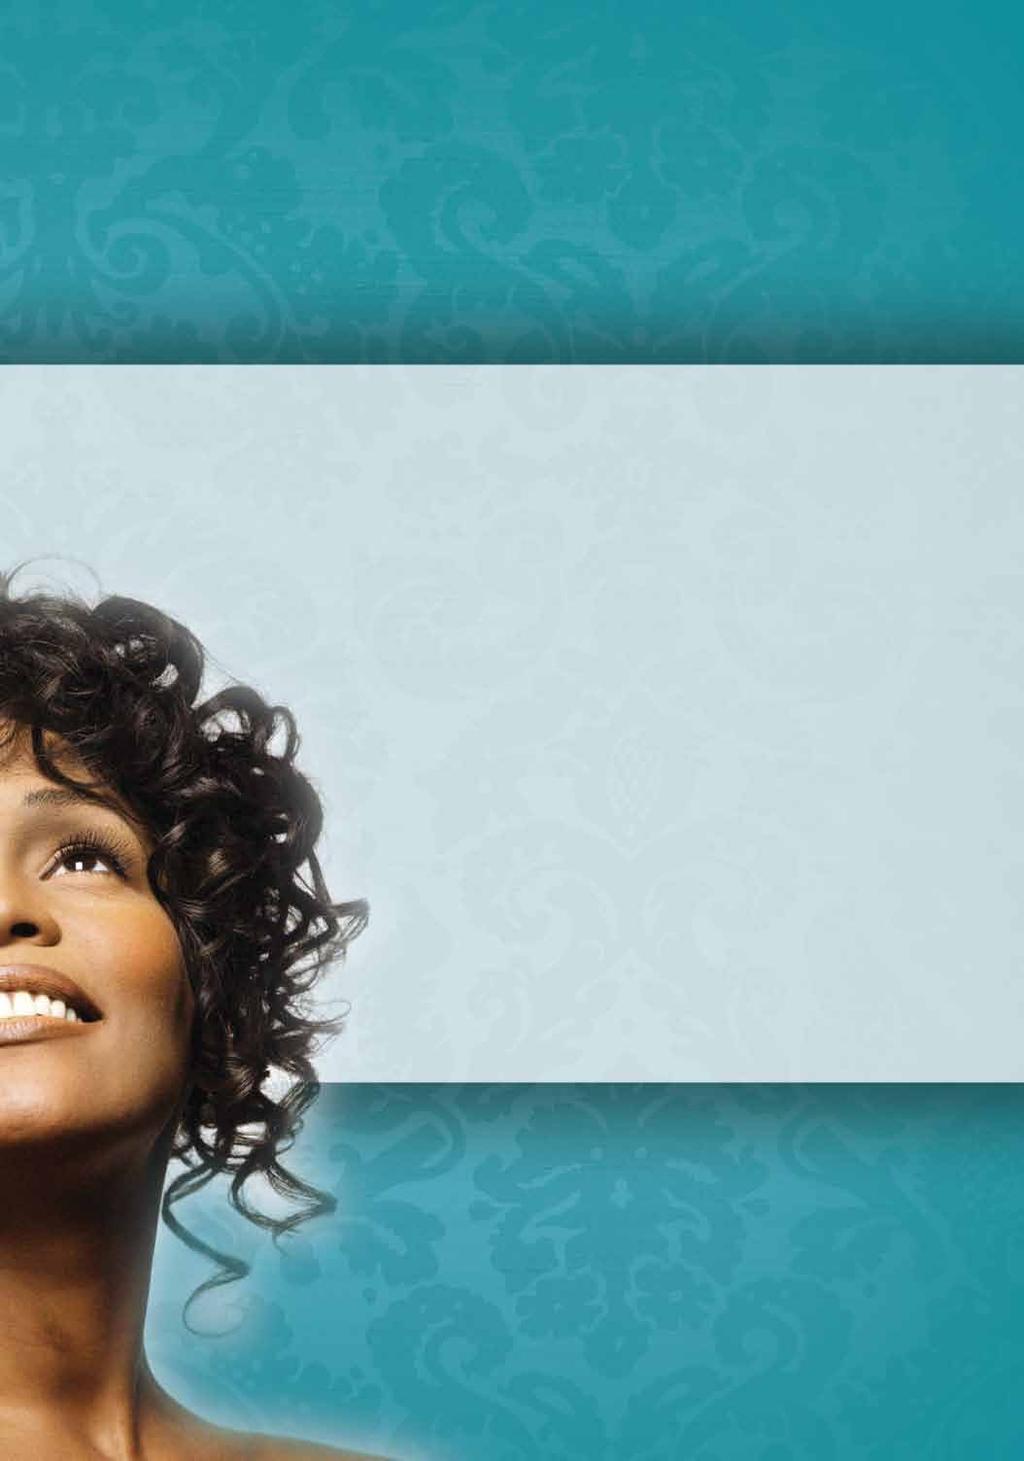 In 1985, she released her debut album Whitney Houston and almost immediately became a smash pop sensation.